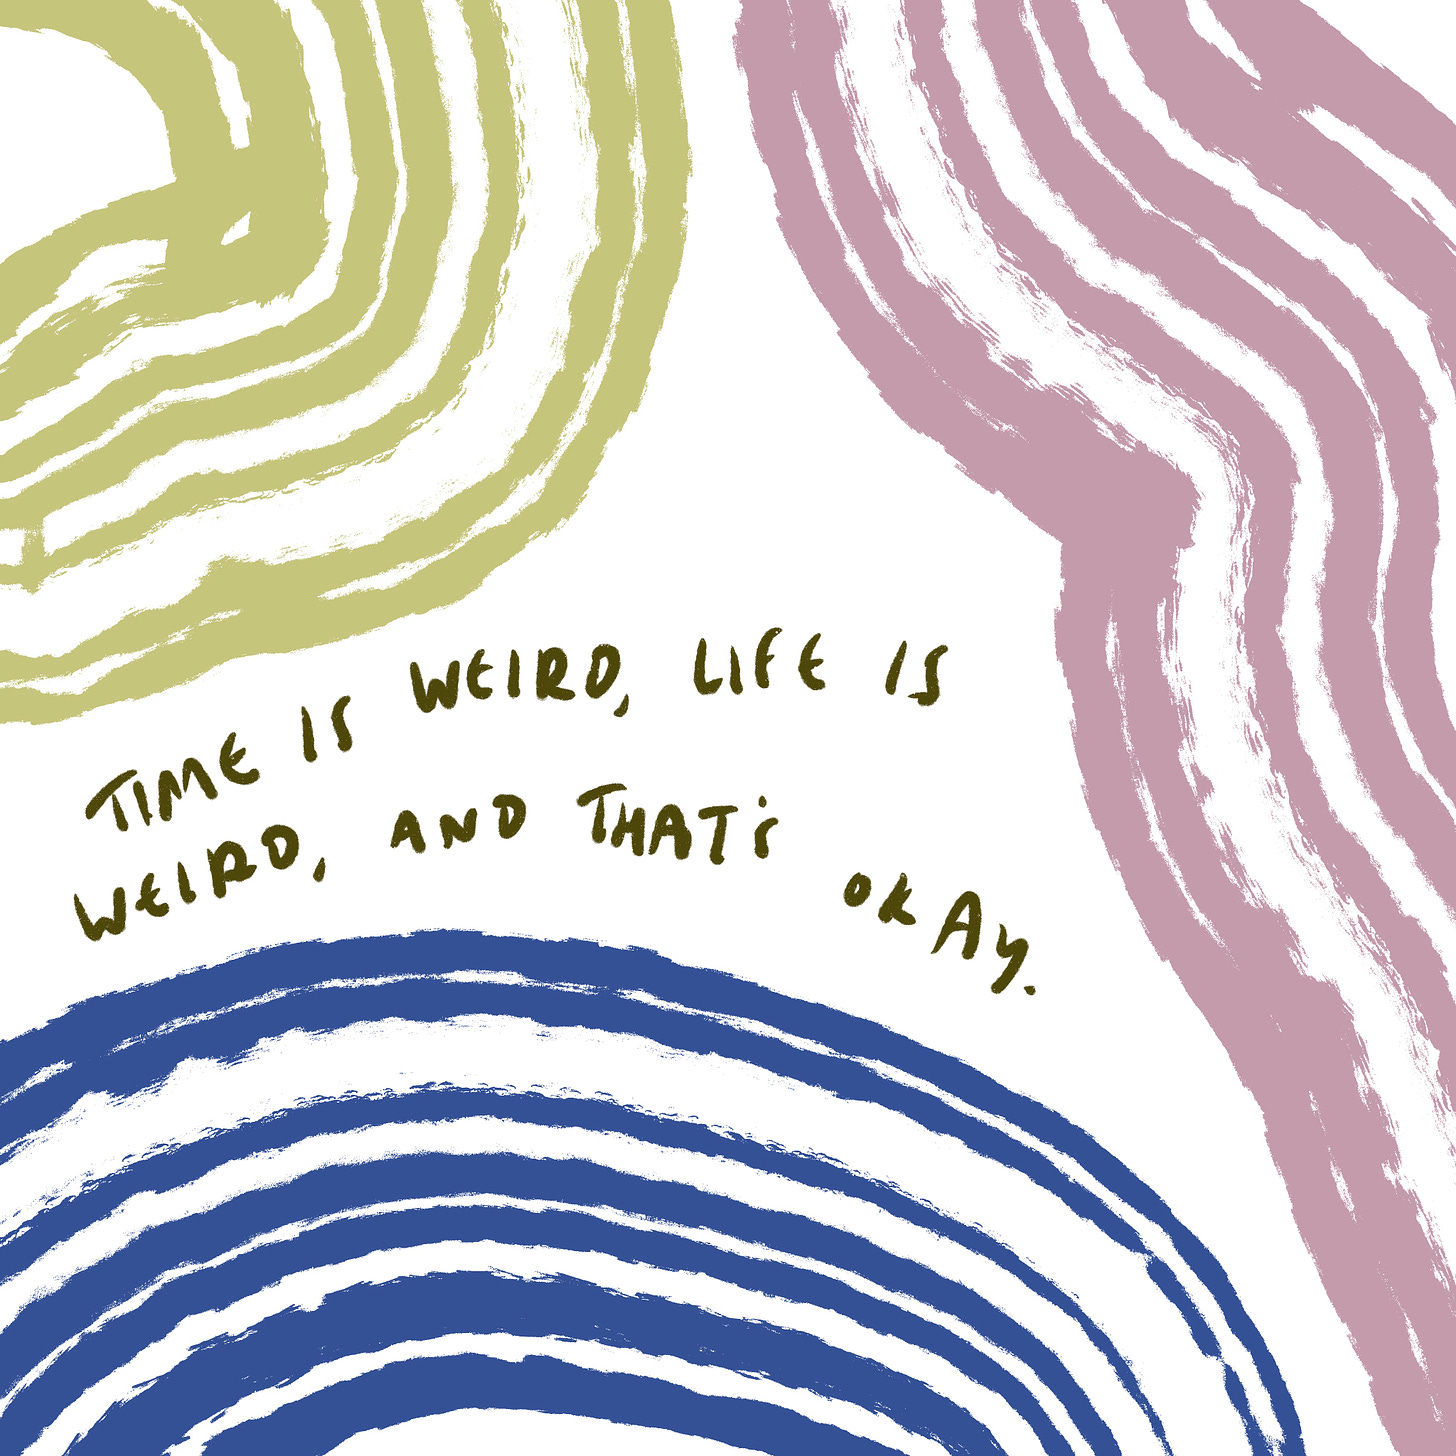 Time is weird, life is weird, and that's okay. 